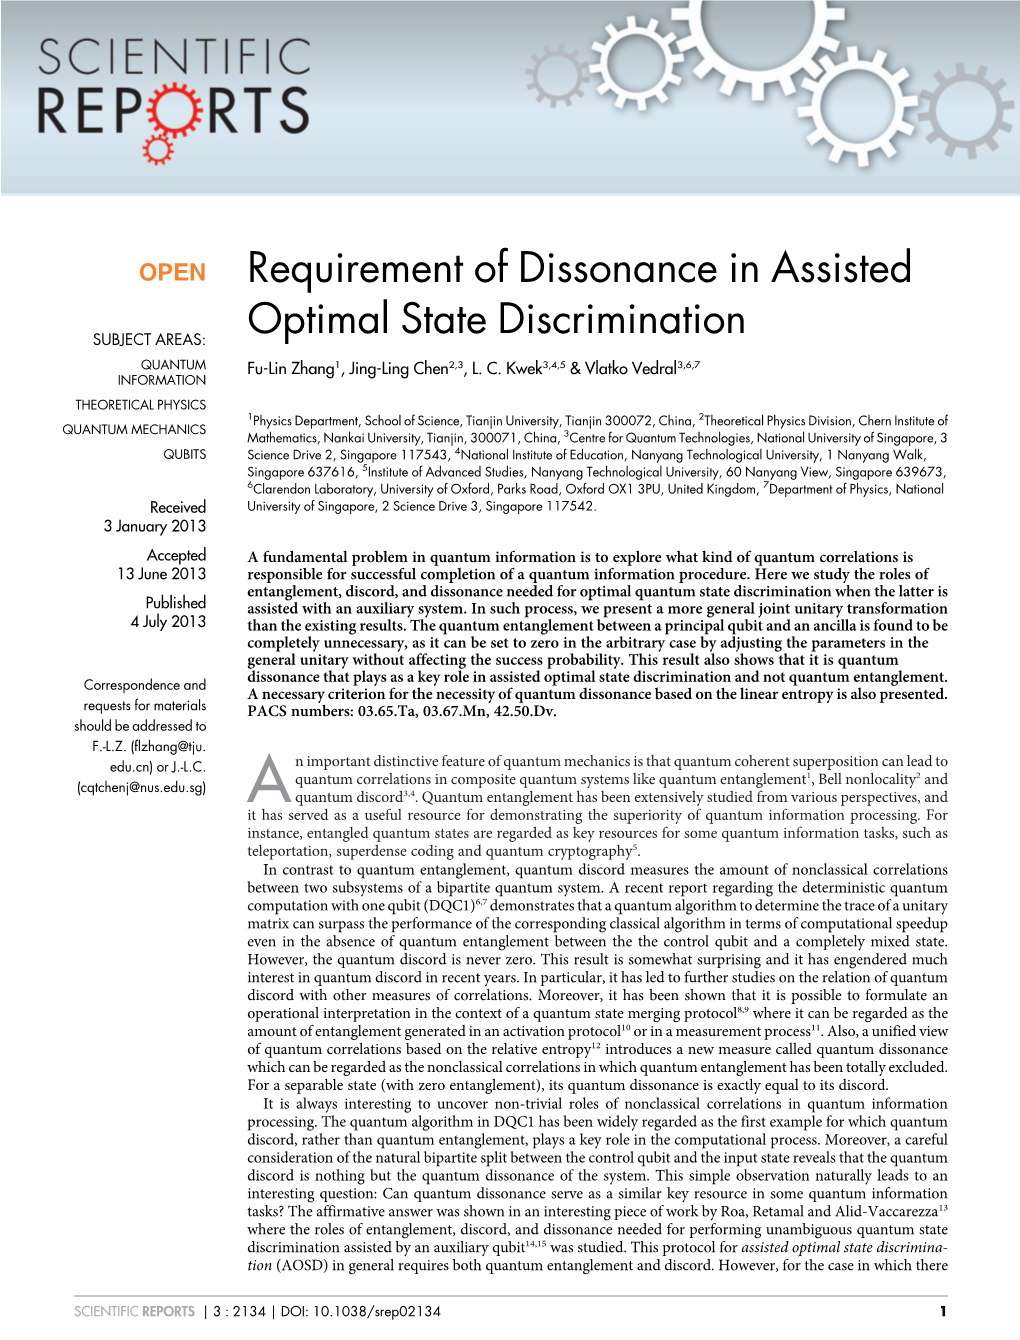 Requirement of Dissonance in Assisted Optimal State Discrimination